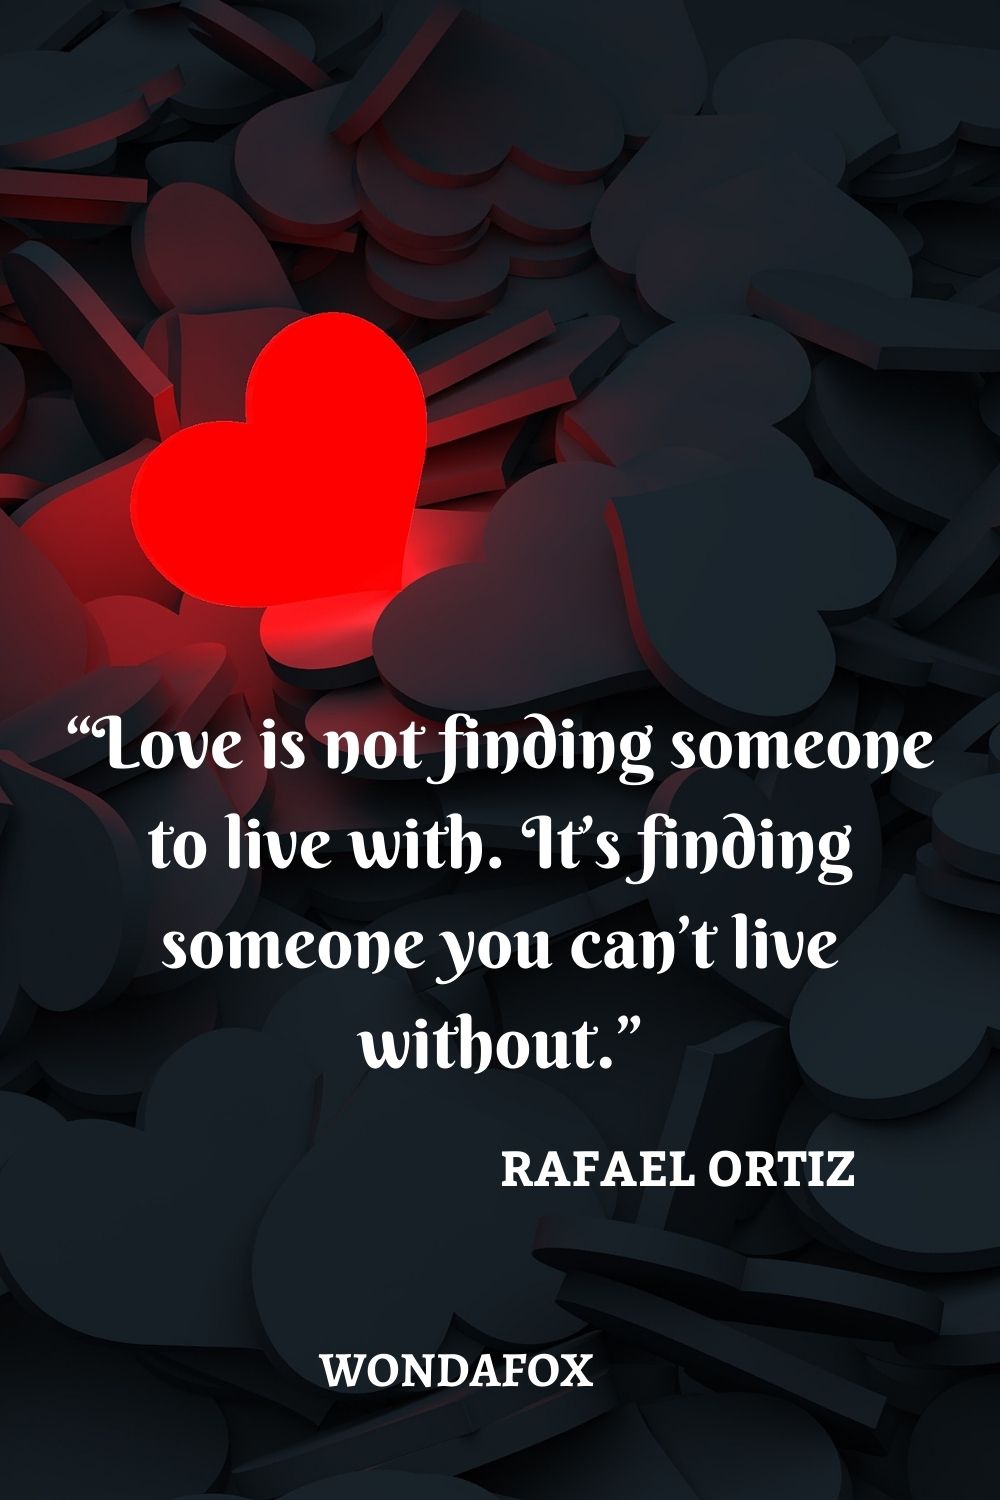 “Love is not finding someone to live with. It’s finding someone you can’t live without.”
Rafael Ortiz